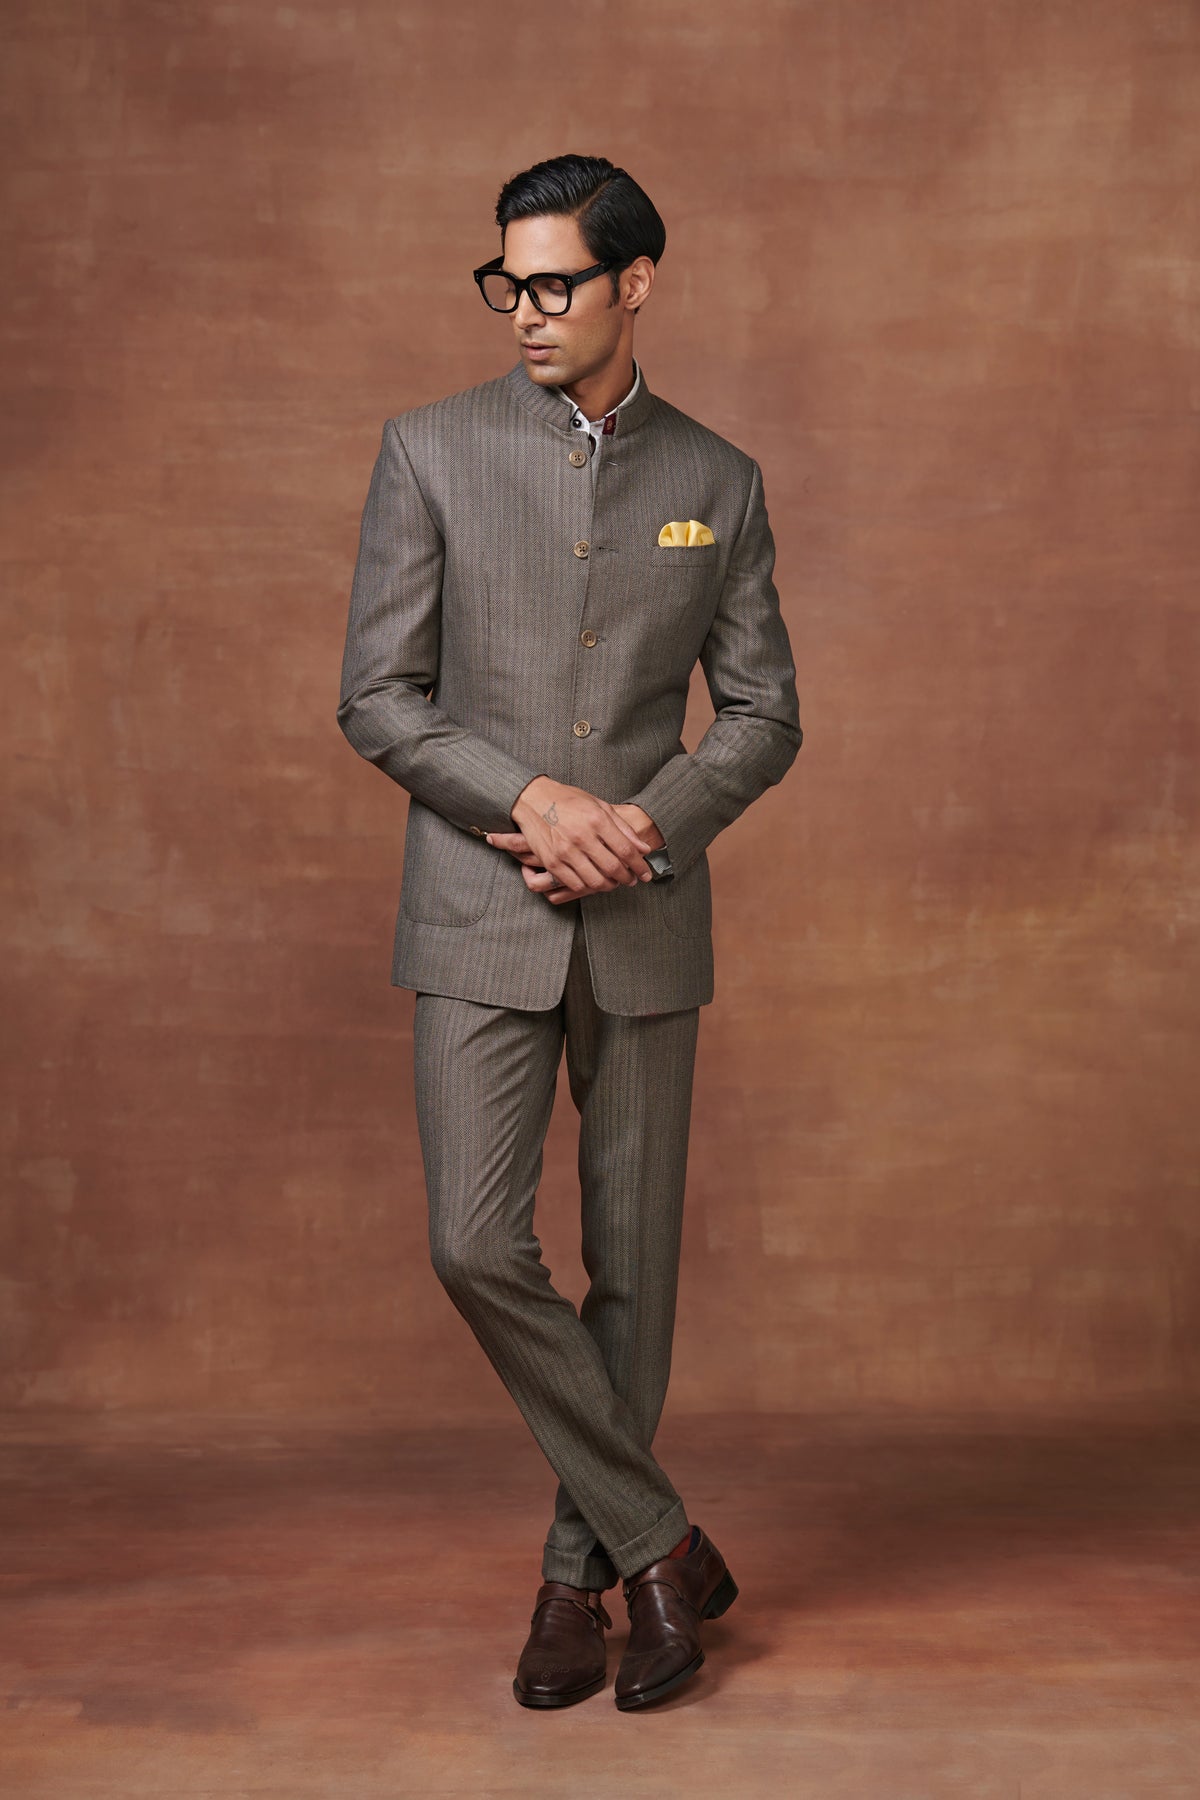 The Heritage Rr Bandhgala Suit